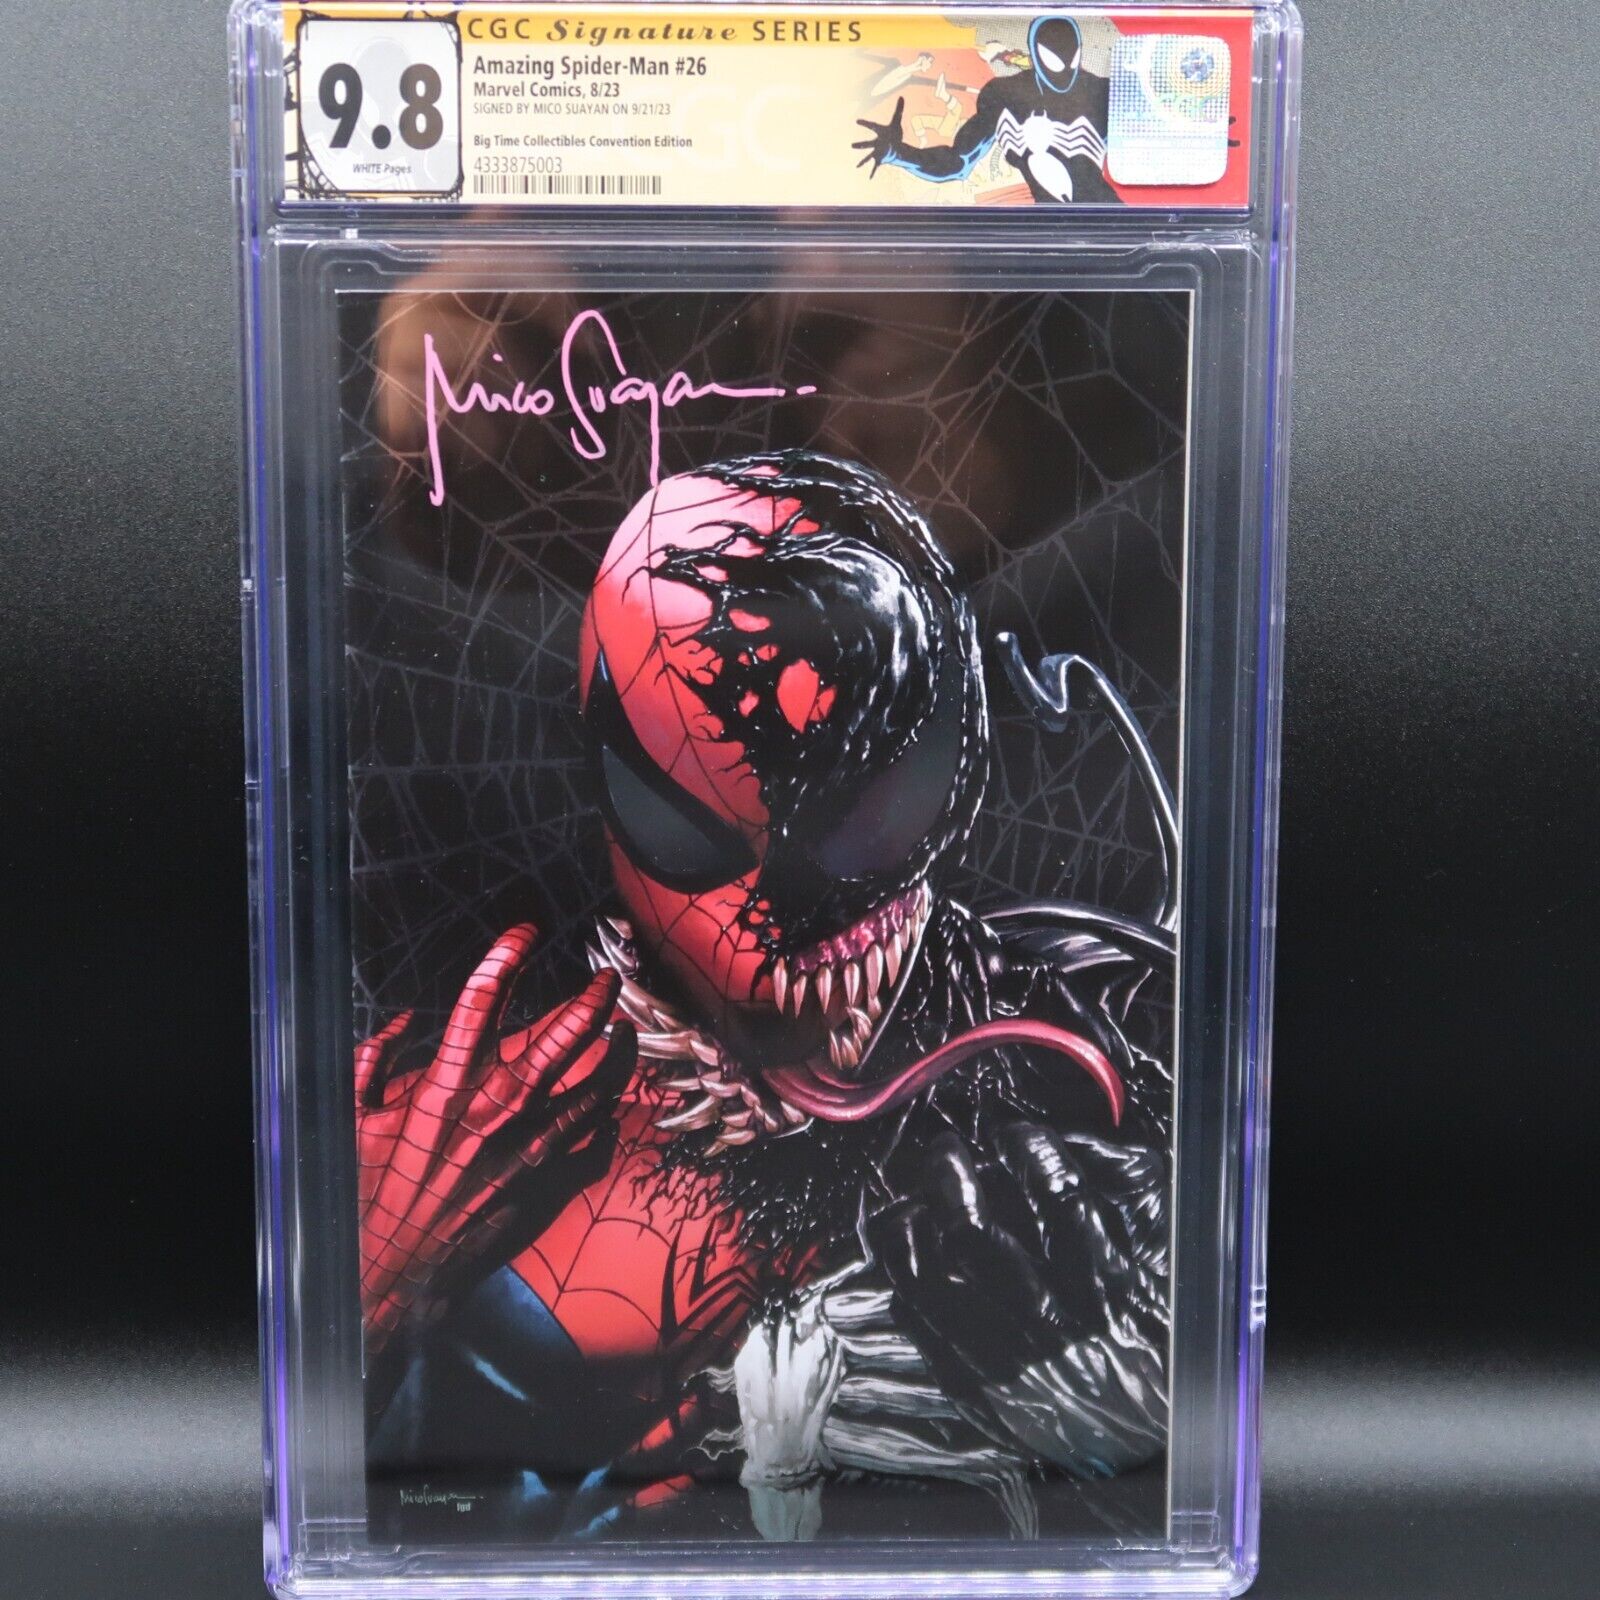 Spider-Man: Spider's Shadow #1 -🗝️ Suayan Variant Cover B - CGC SIGNATURE